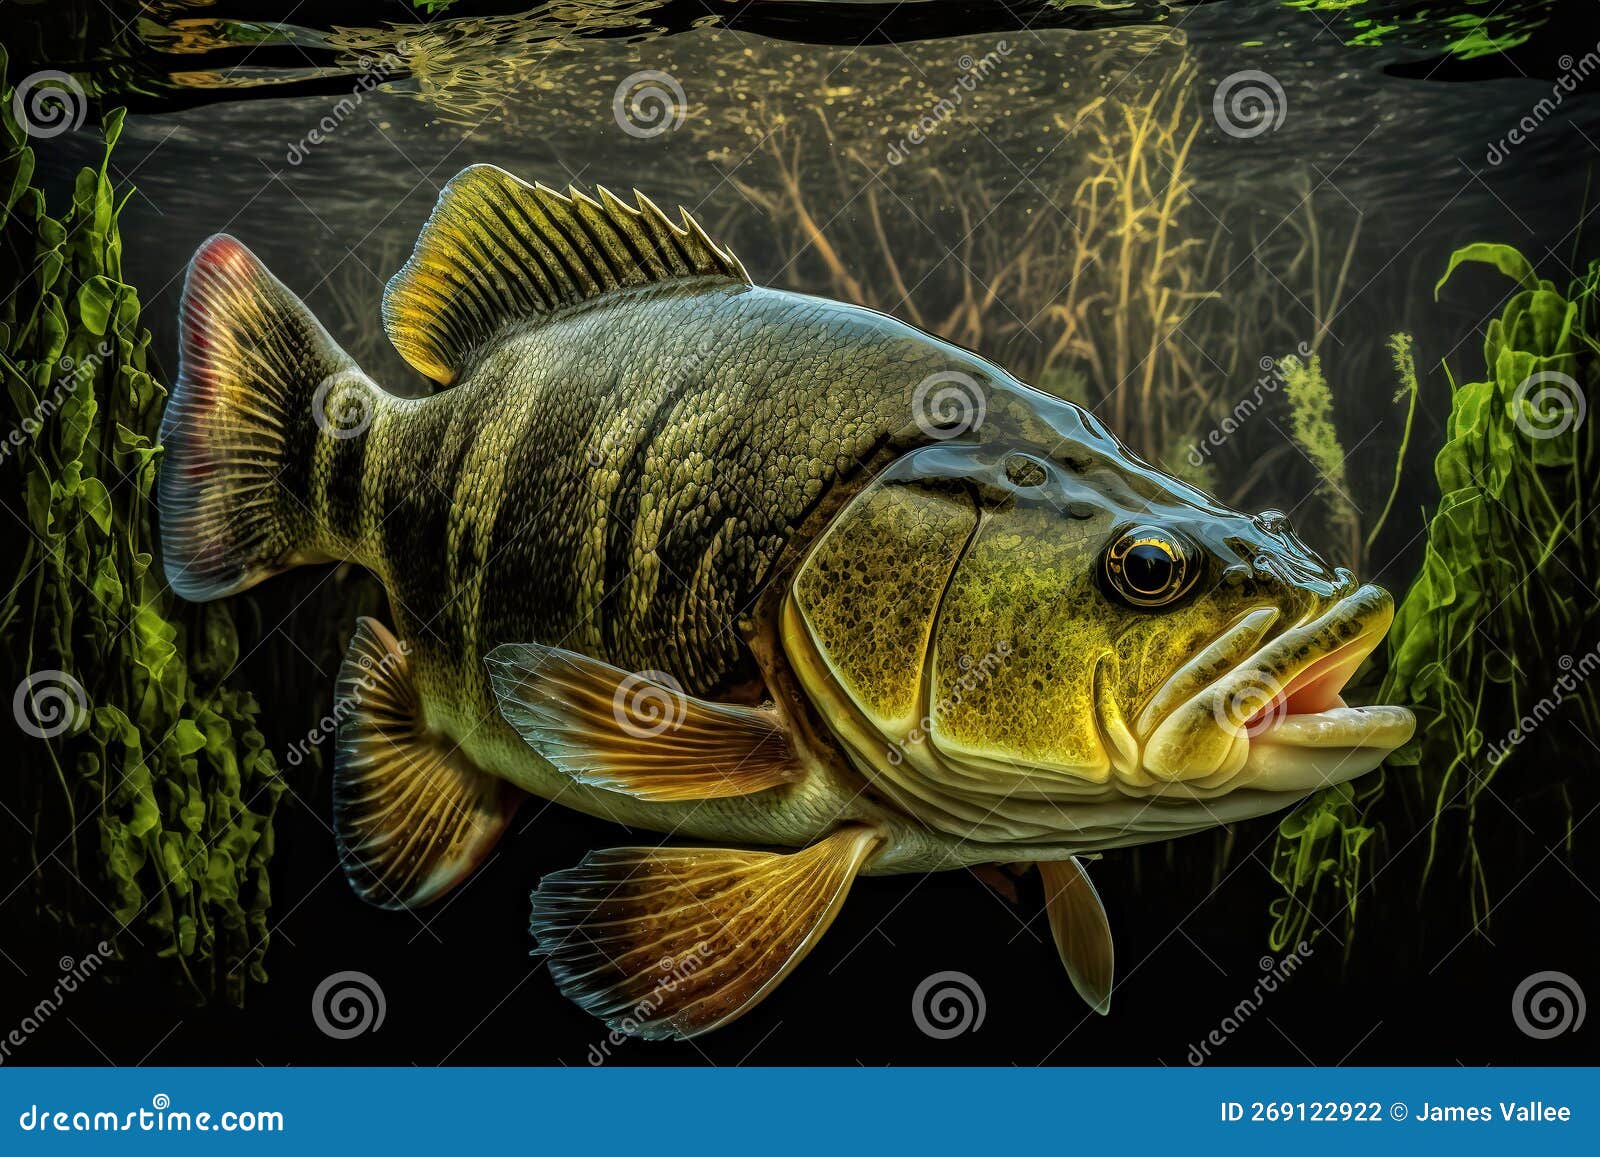 Closeup of a Large Mouth Bass Underwater - Ai Gernerative Stock